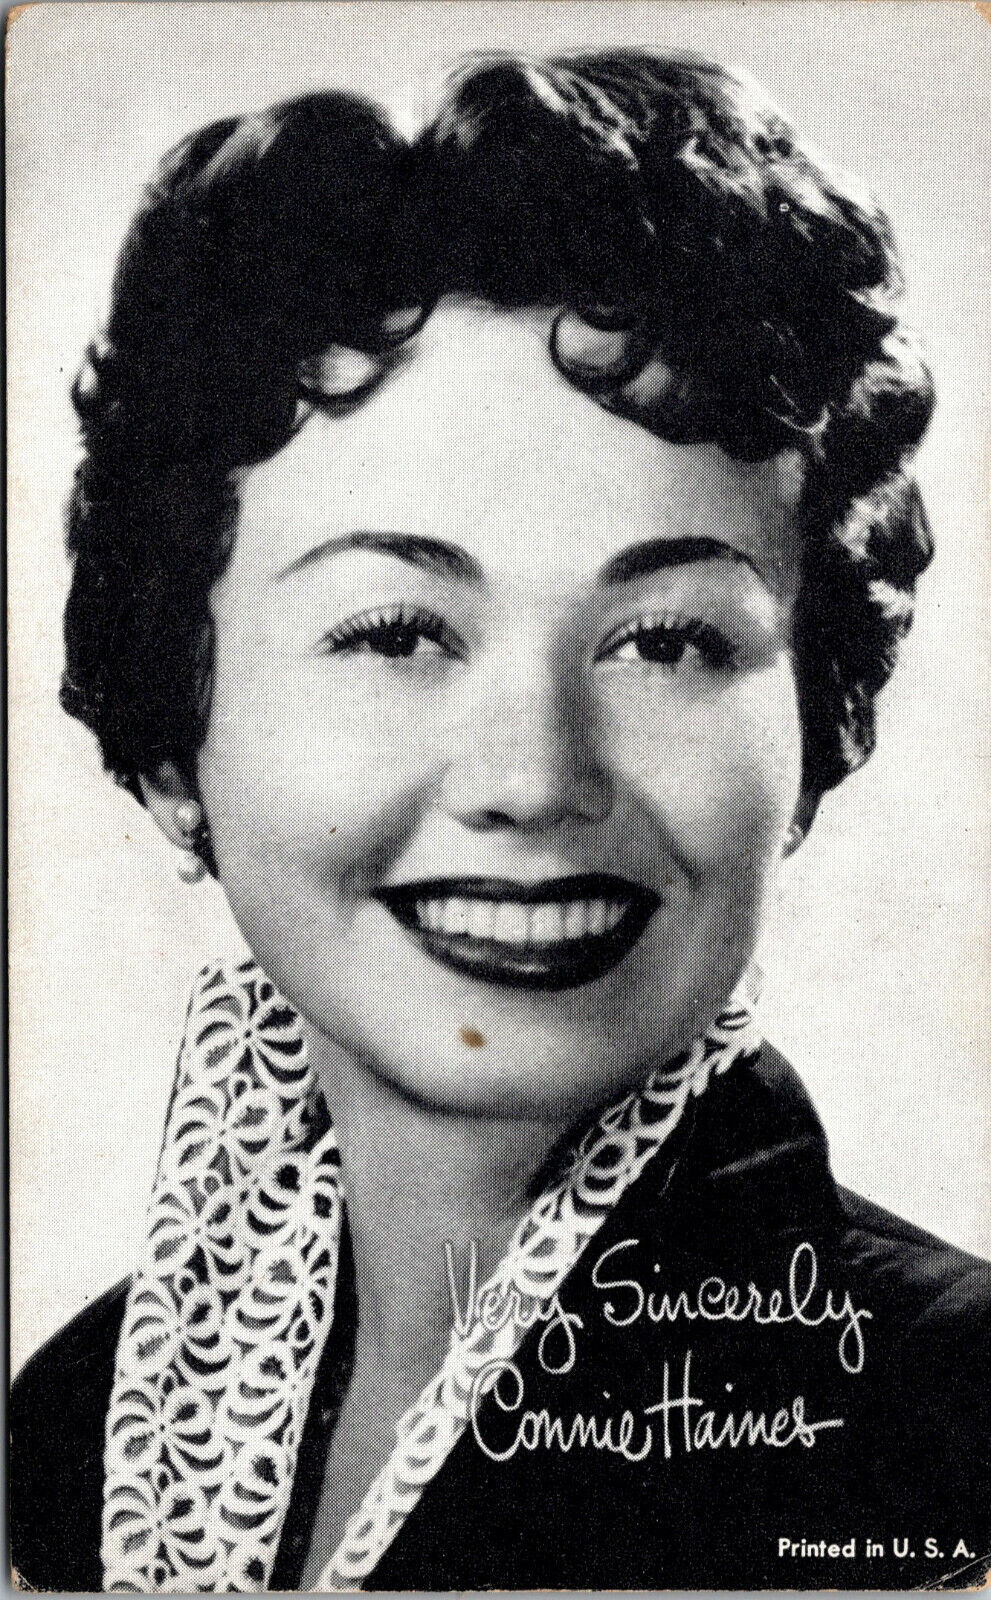 Vtg 1940s Connie Haines Singer Exhibit Arcade Card Pin Up Style Girl Postcard